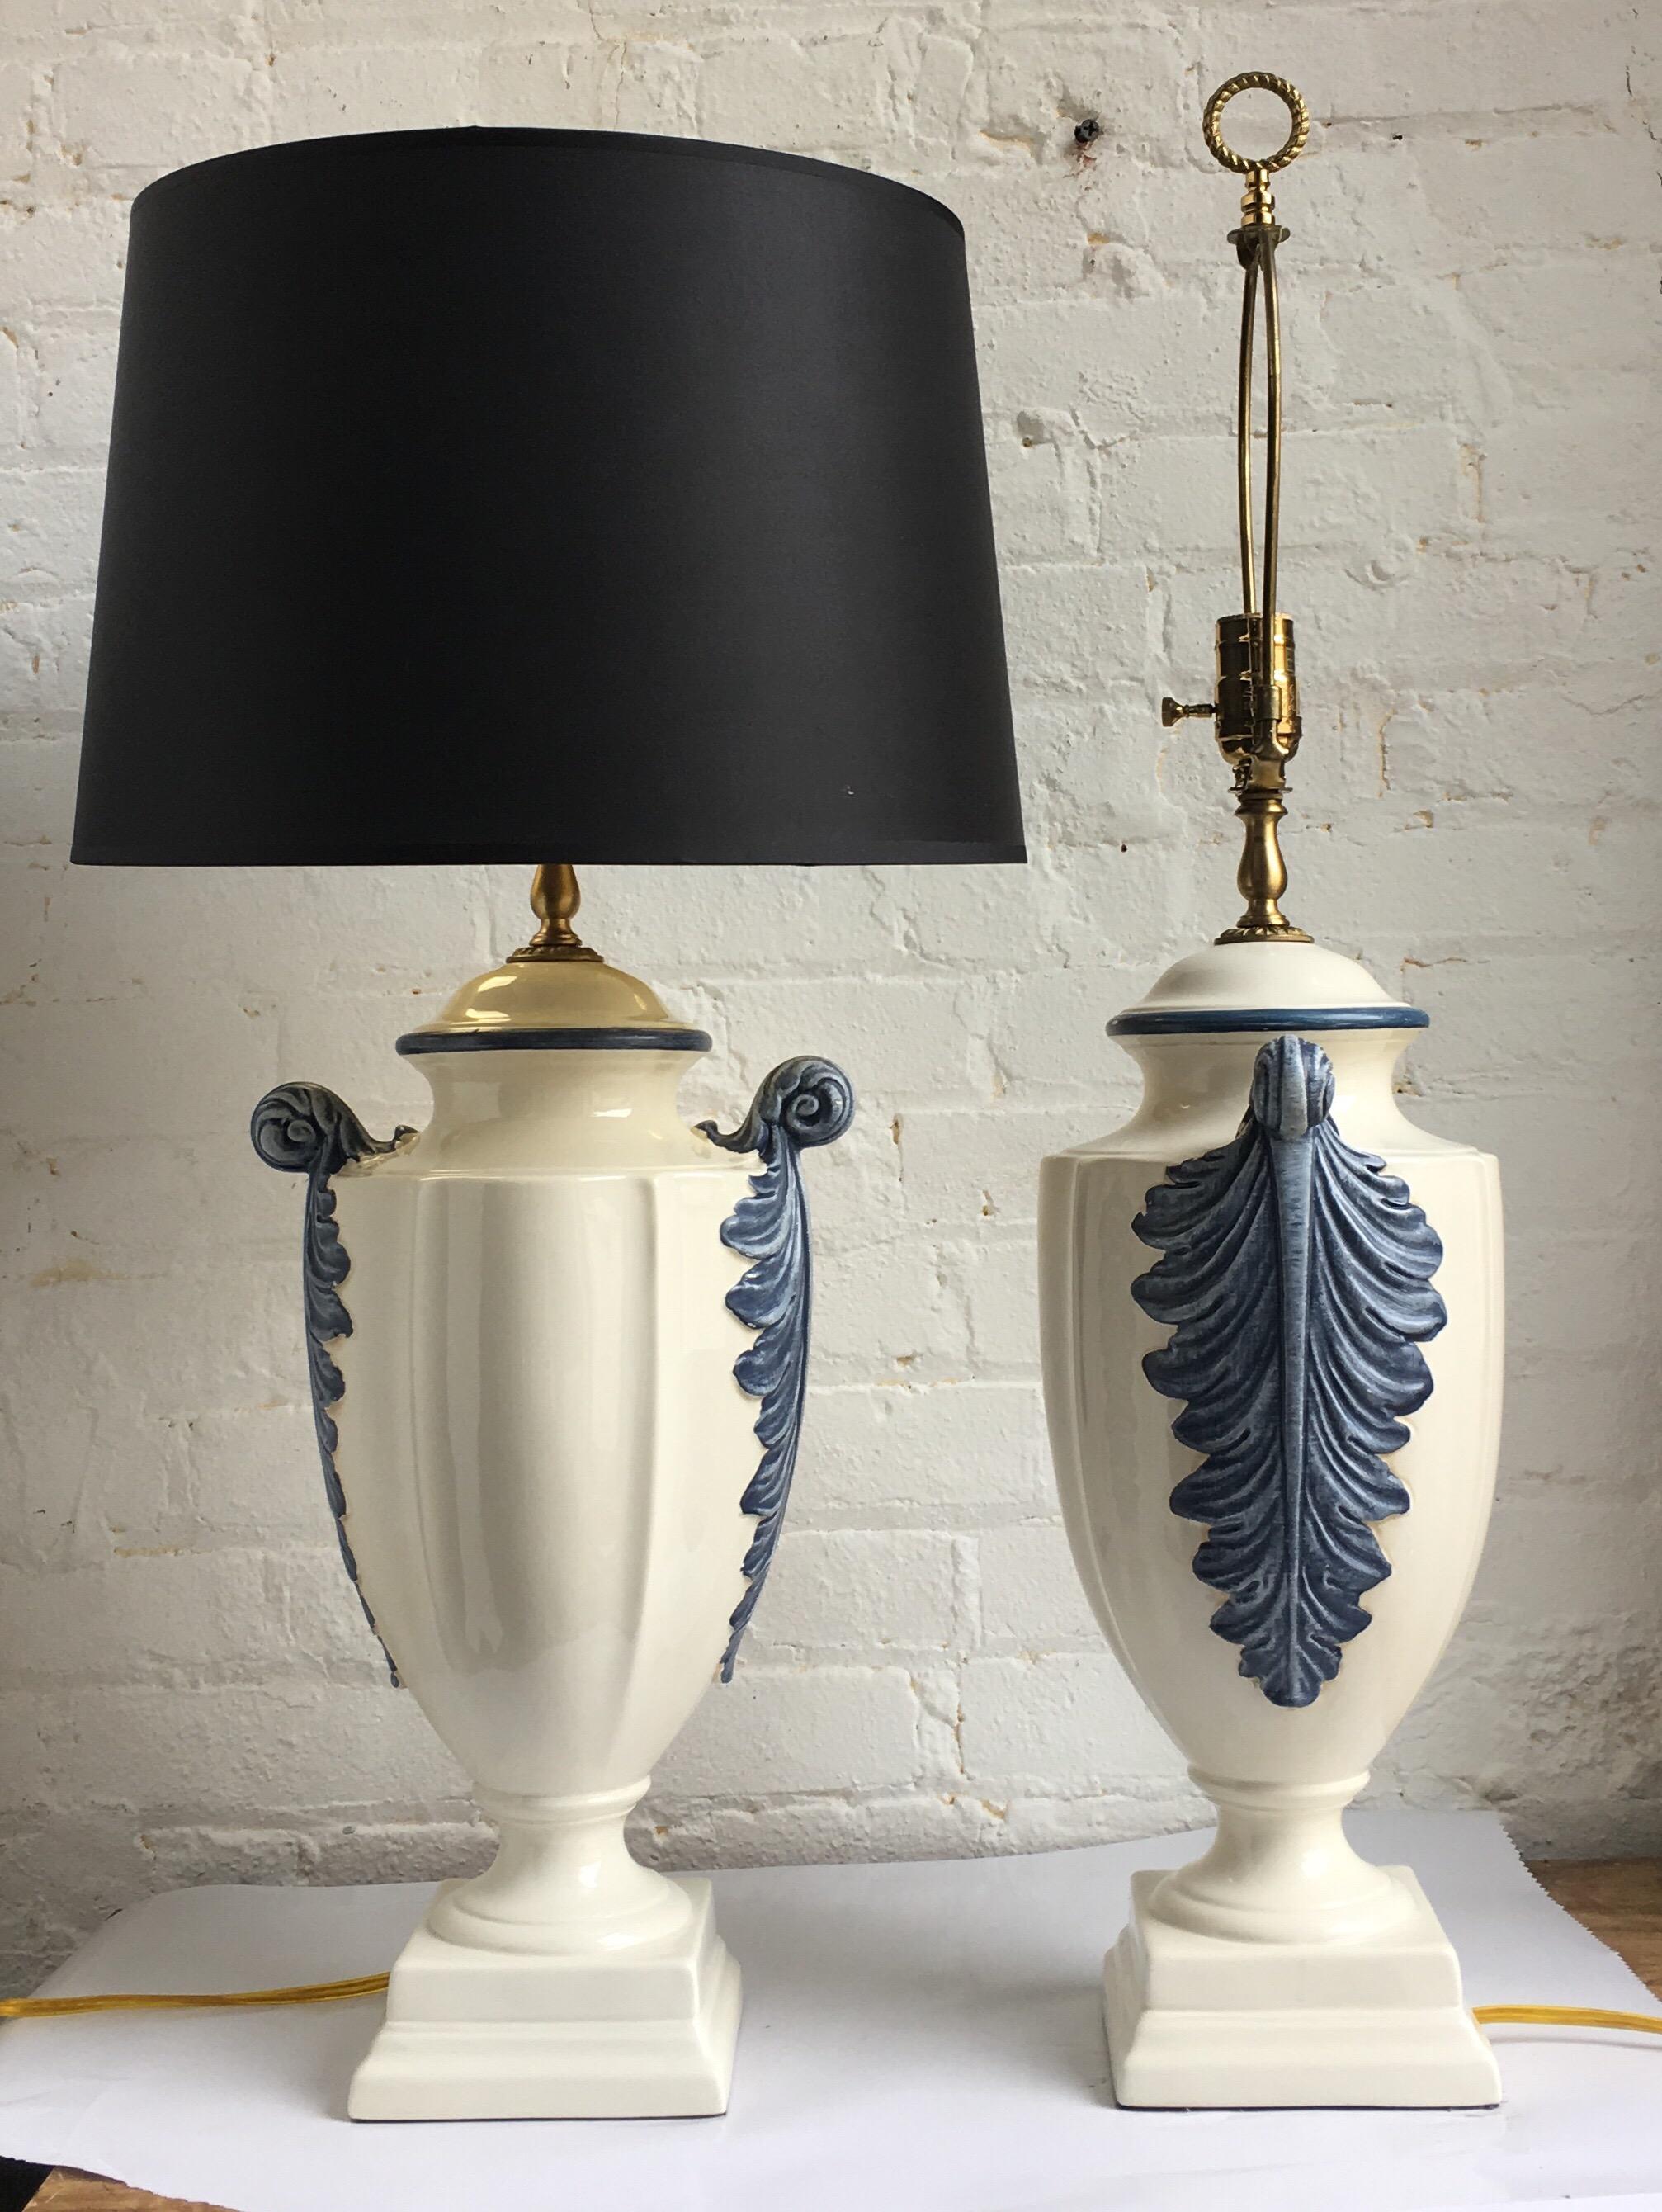 Pair of Hollywood Regency style blue and white porcelain glazed urn table lamps on plinth bases. Side handles feature dimensional hand painted plume or feather decorations. Lamp shades not included. 

Measures: 31.5 inches high to harp.
22.5